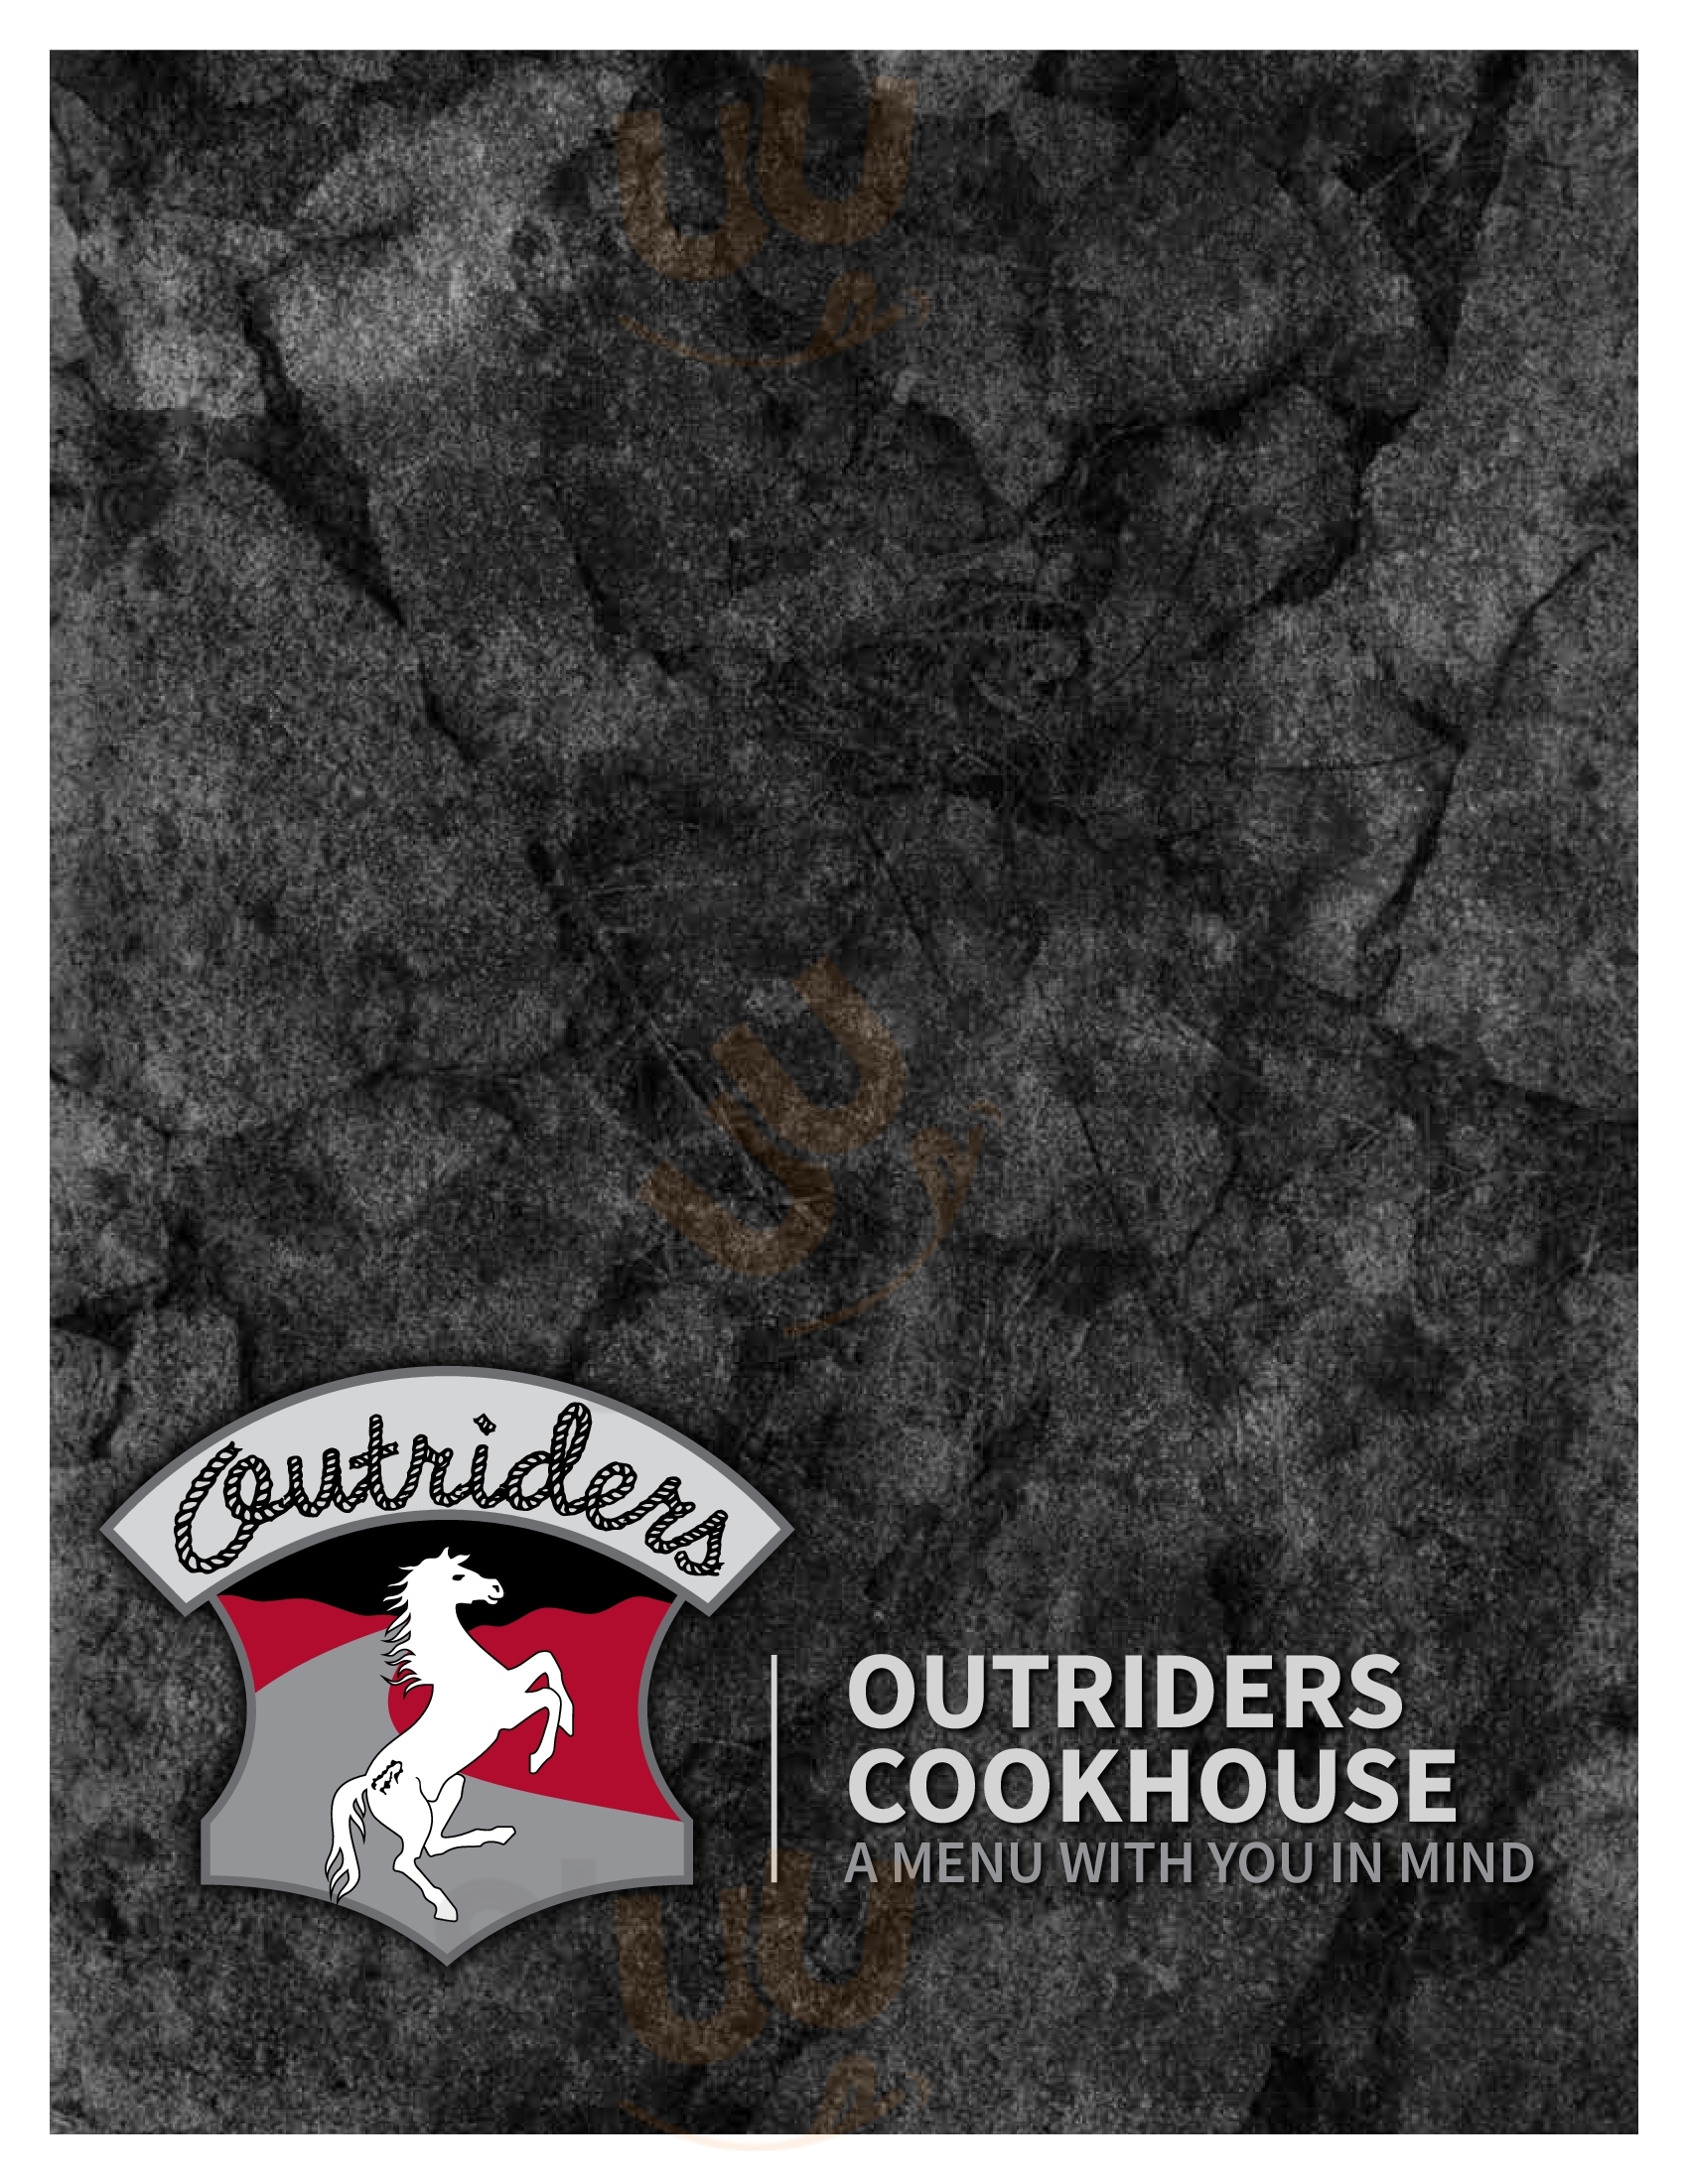 Outriders Cookhouse Charlottetown Menu - 1